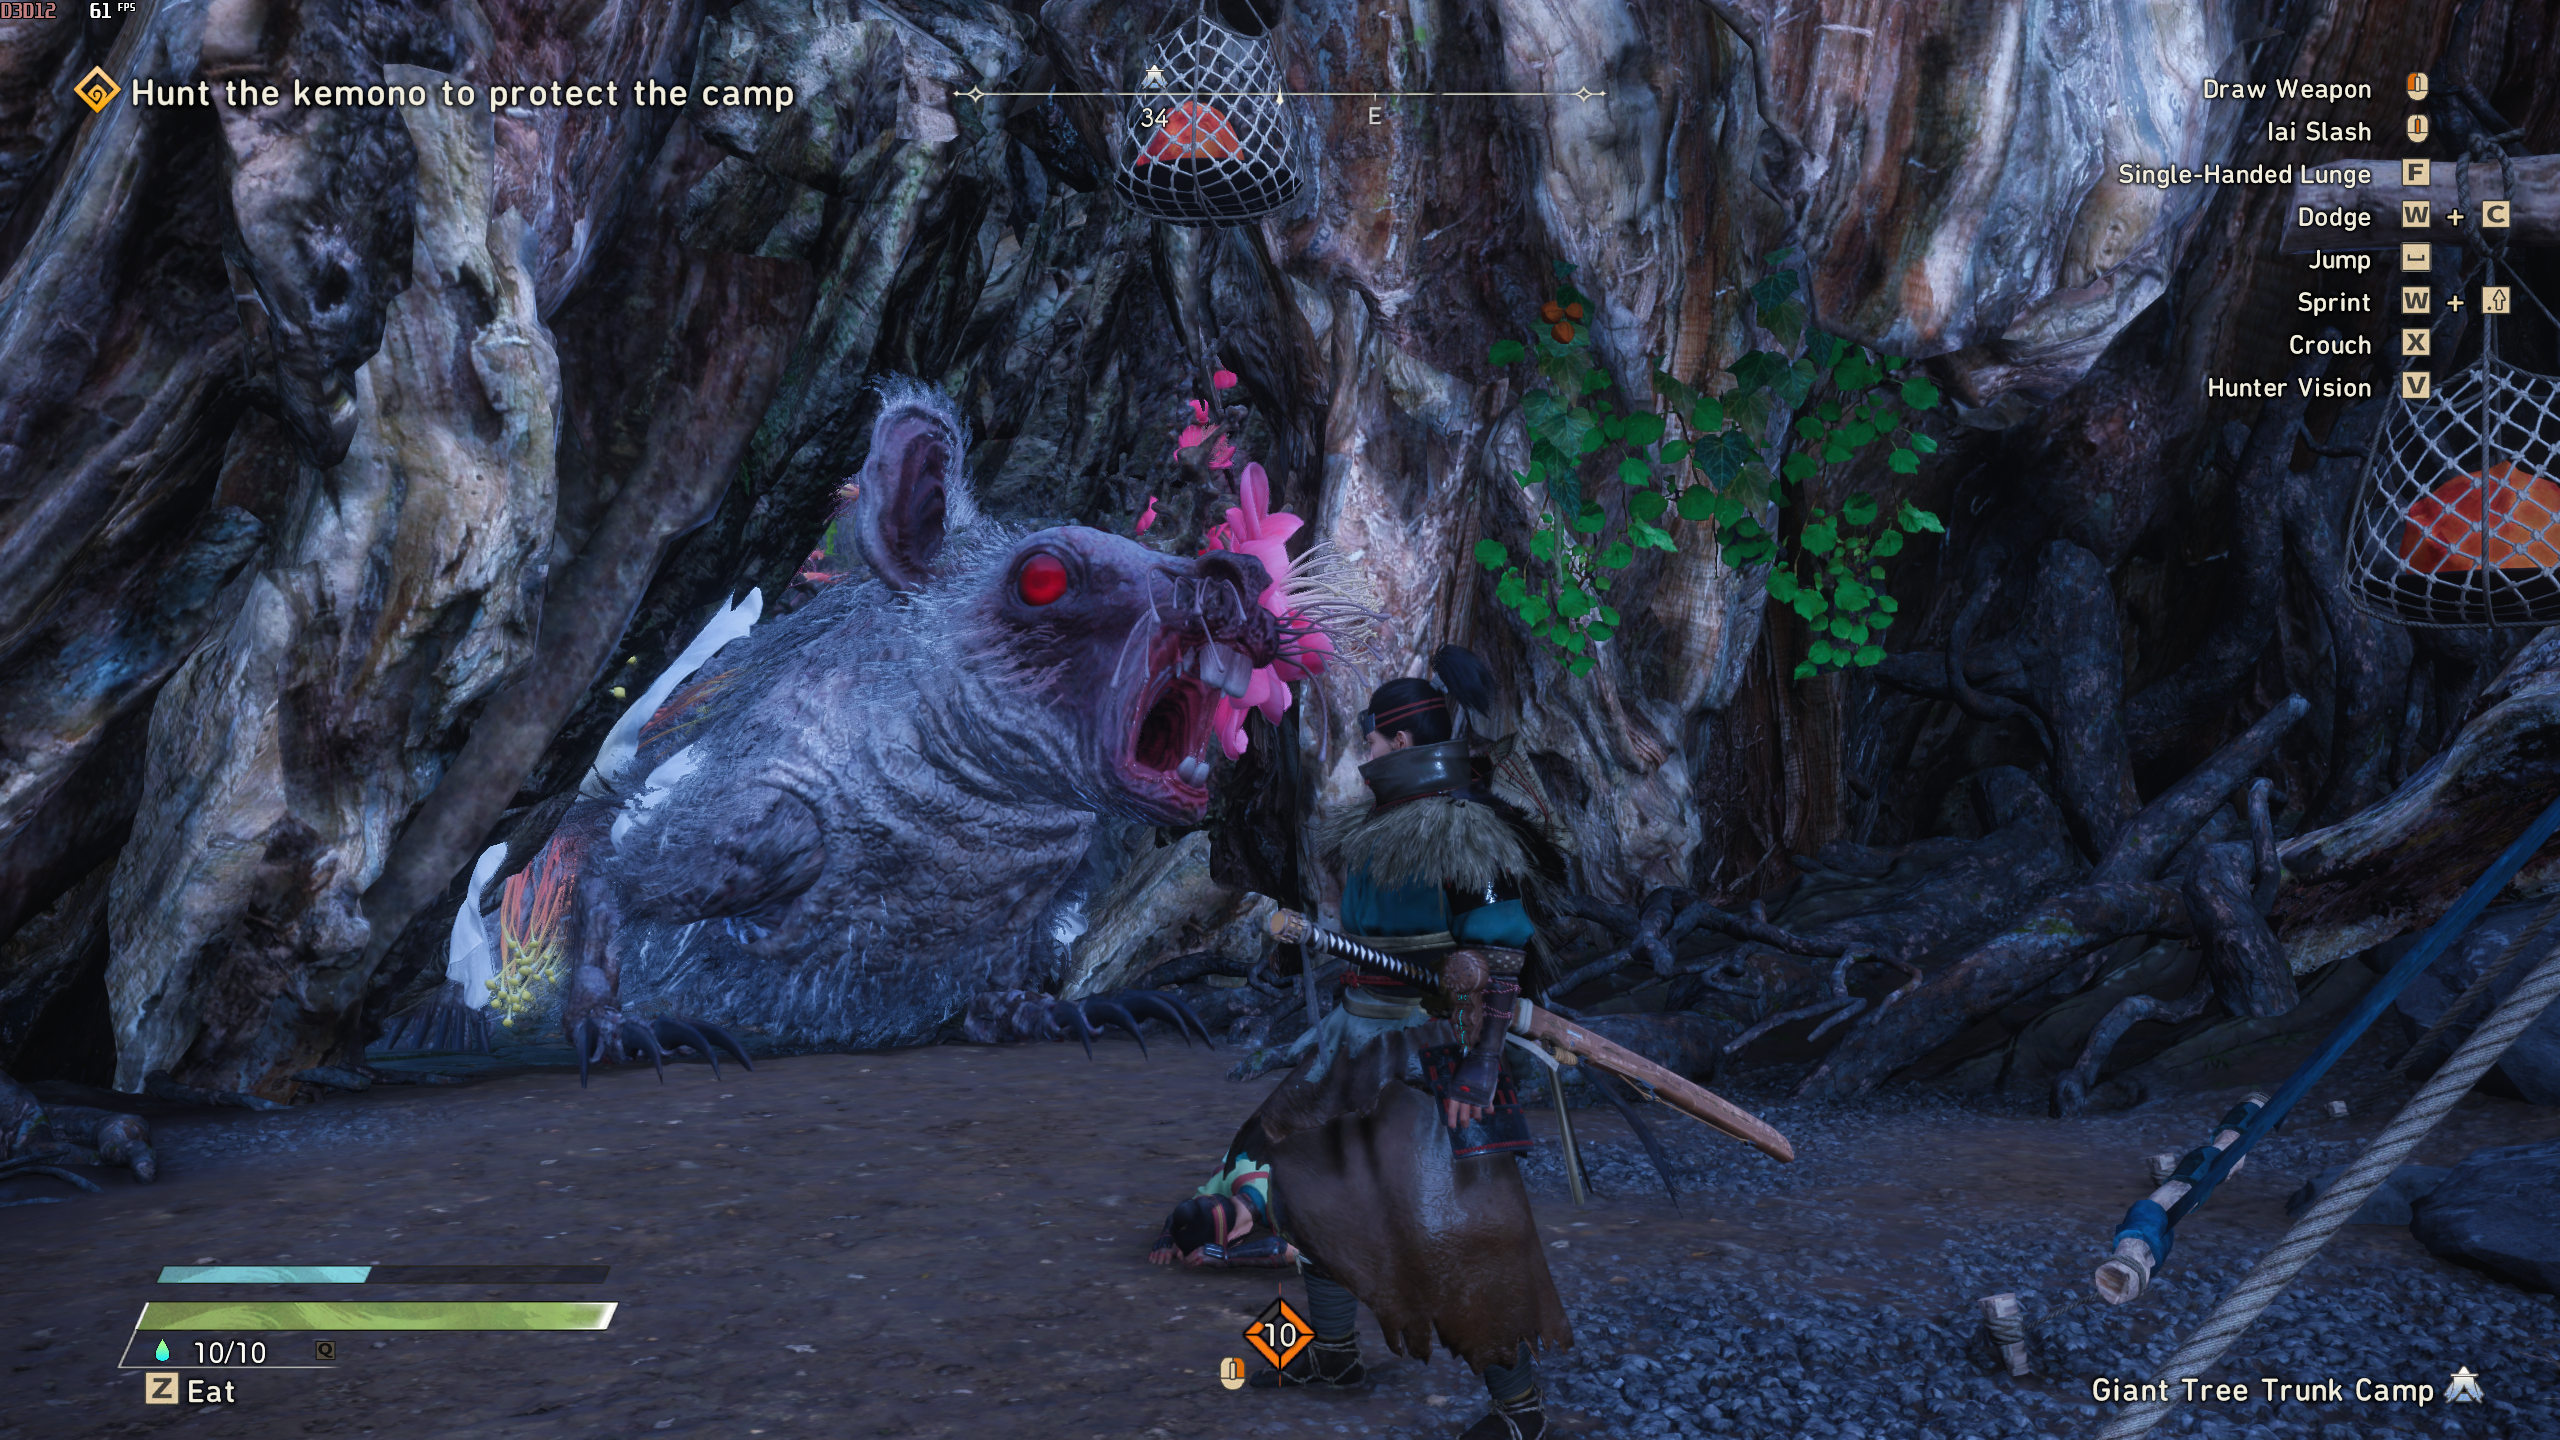 A Ragetail Kemono attacks the player in Wild Hearts.